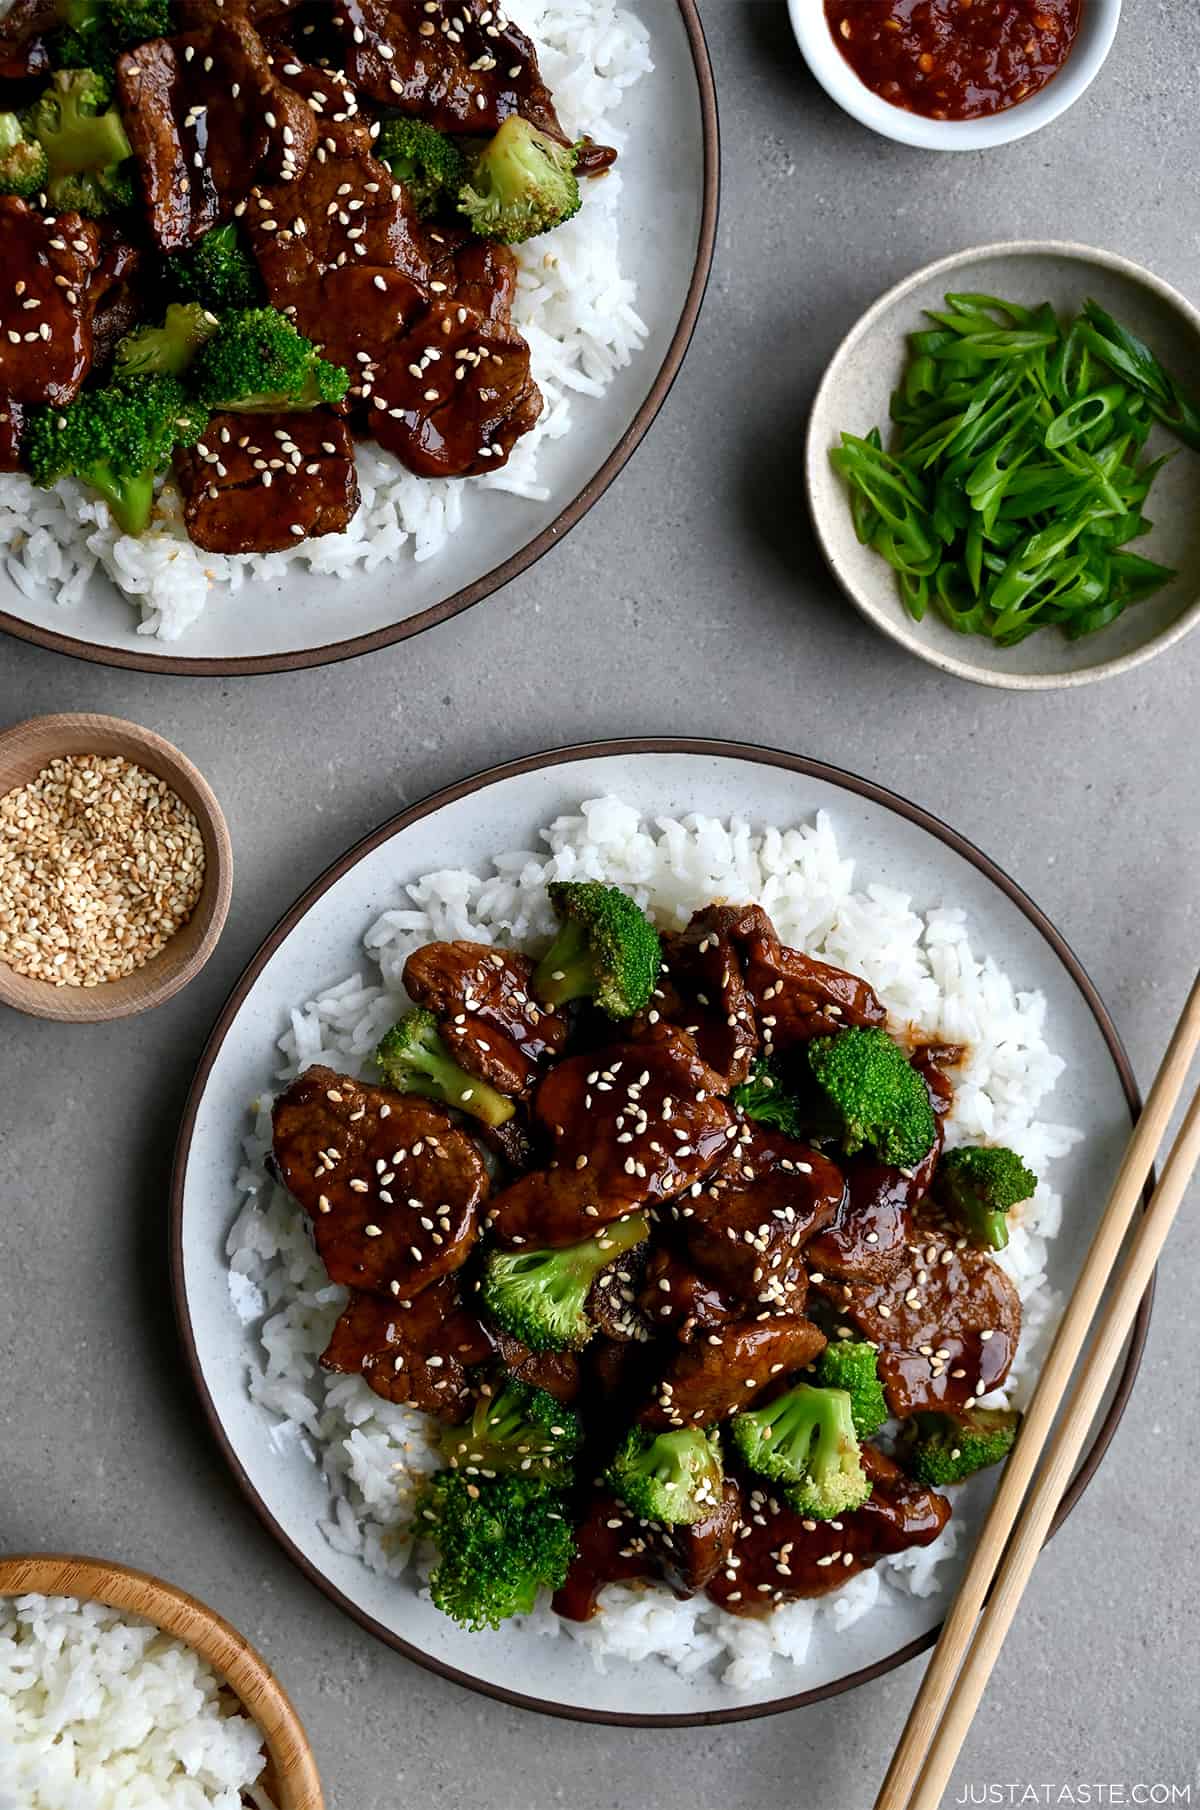 Quick Caramelized Pork and Broccoli over a bed of rice on a plate with chopsticks next to a small bowl containing sesame seeds and a bowl containing broccoli florets.